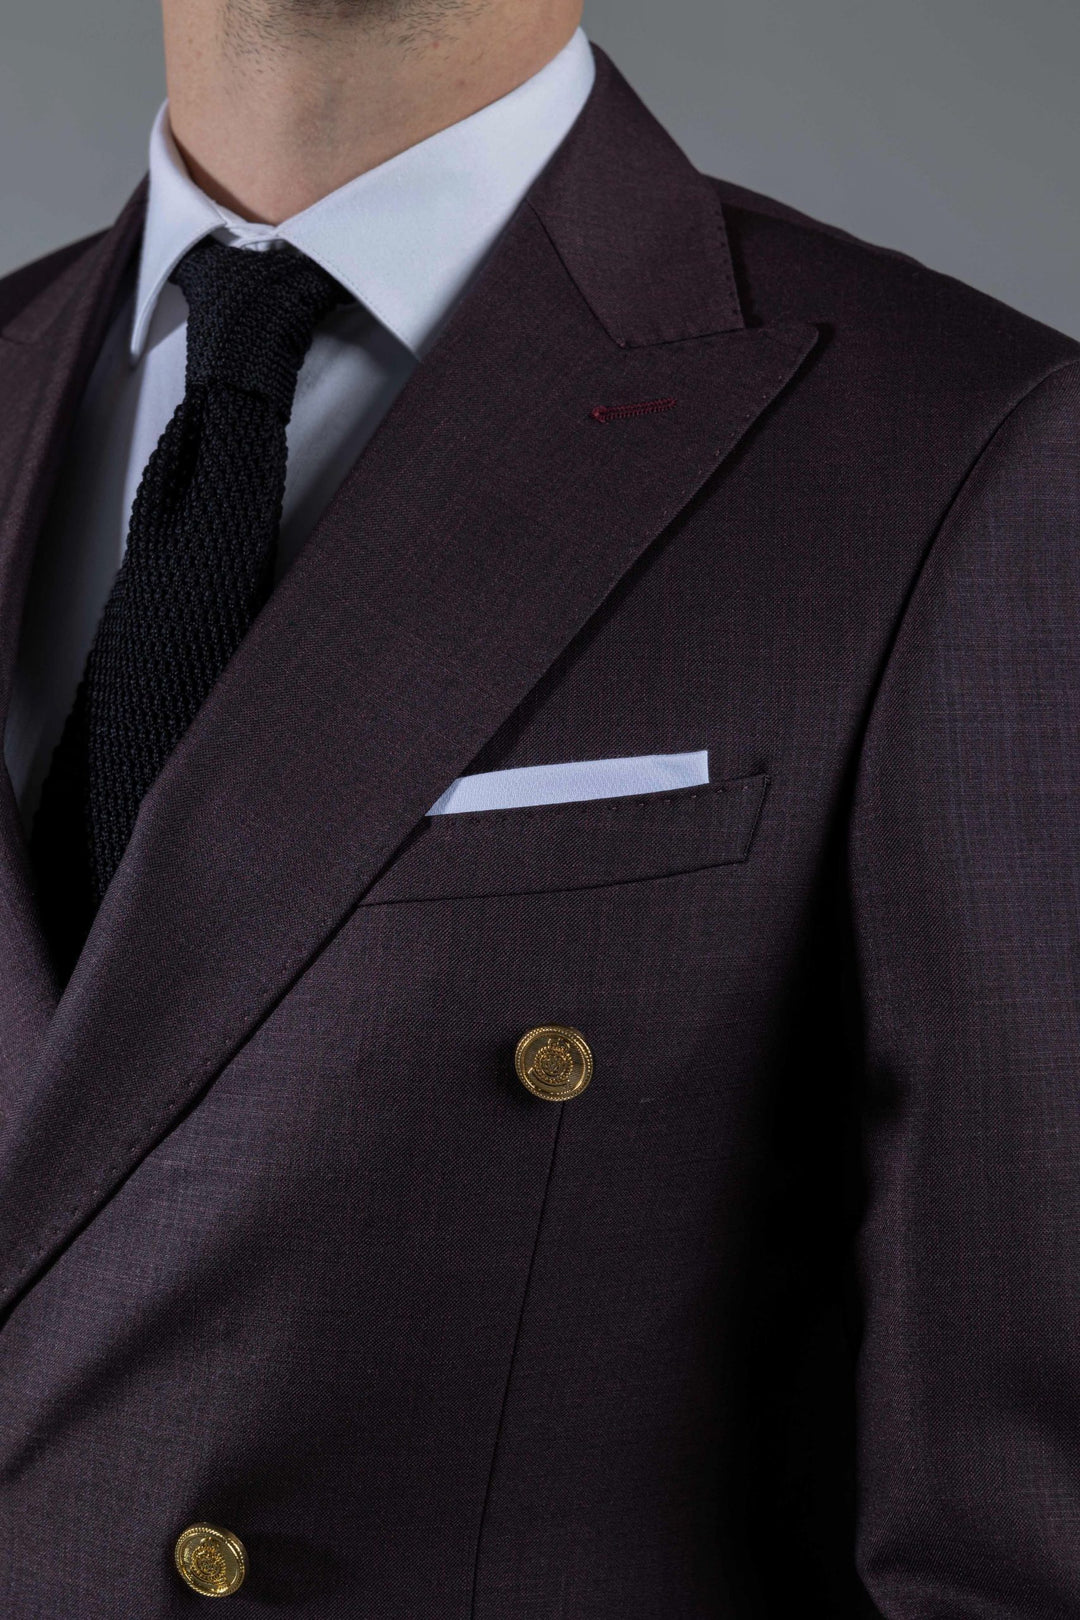 Two-piece burgundy suit with double-breasted jacket